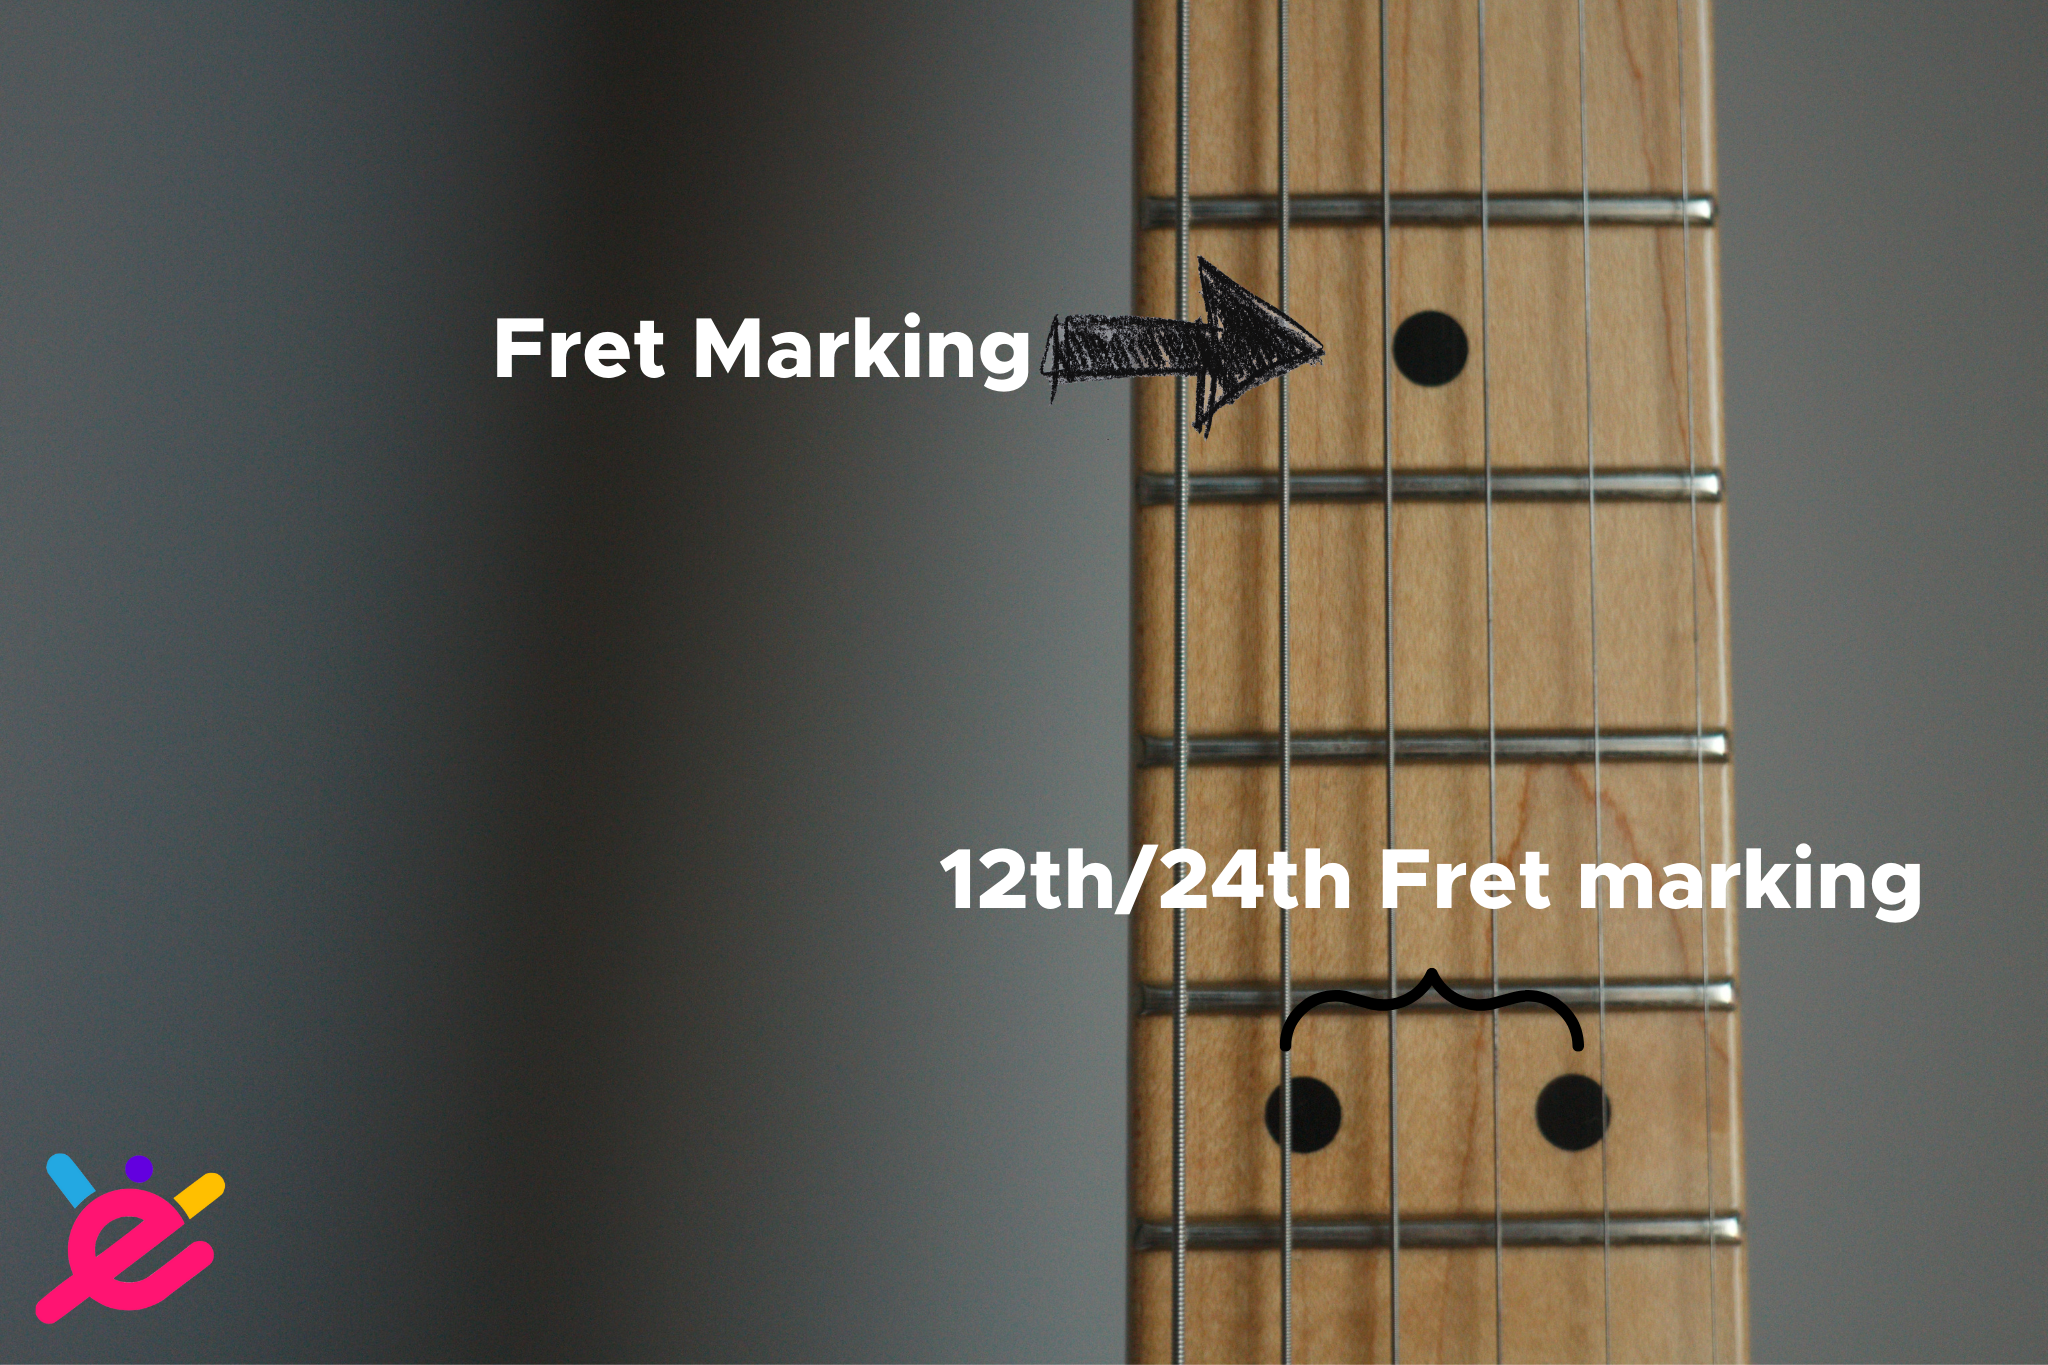 fret markings - what is fret on a guitar